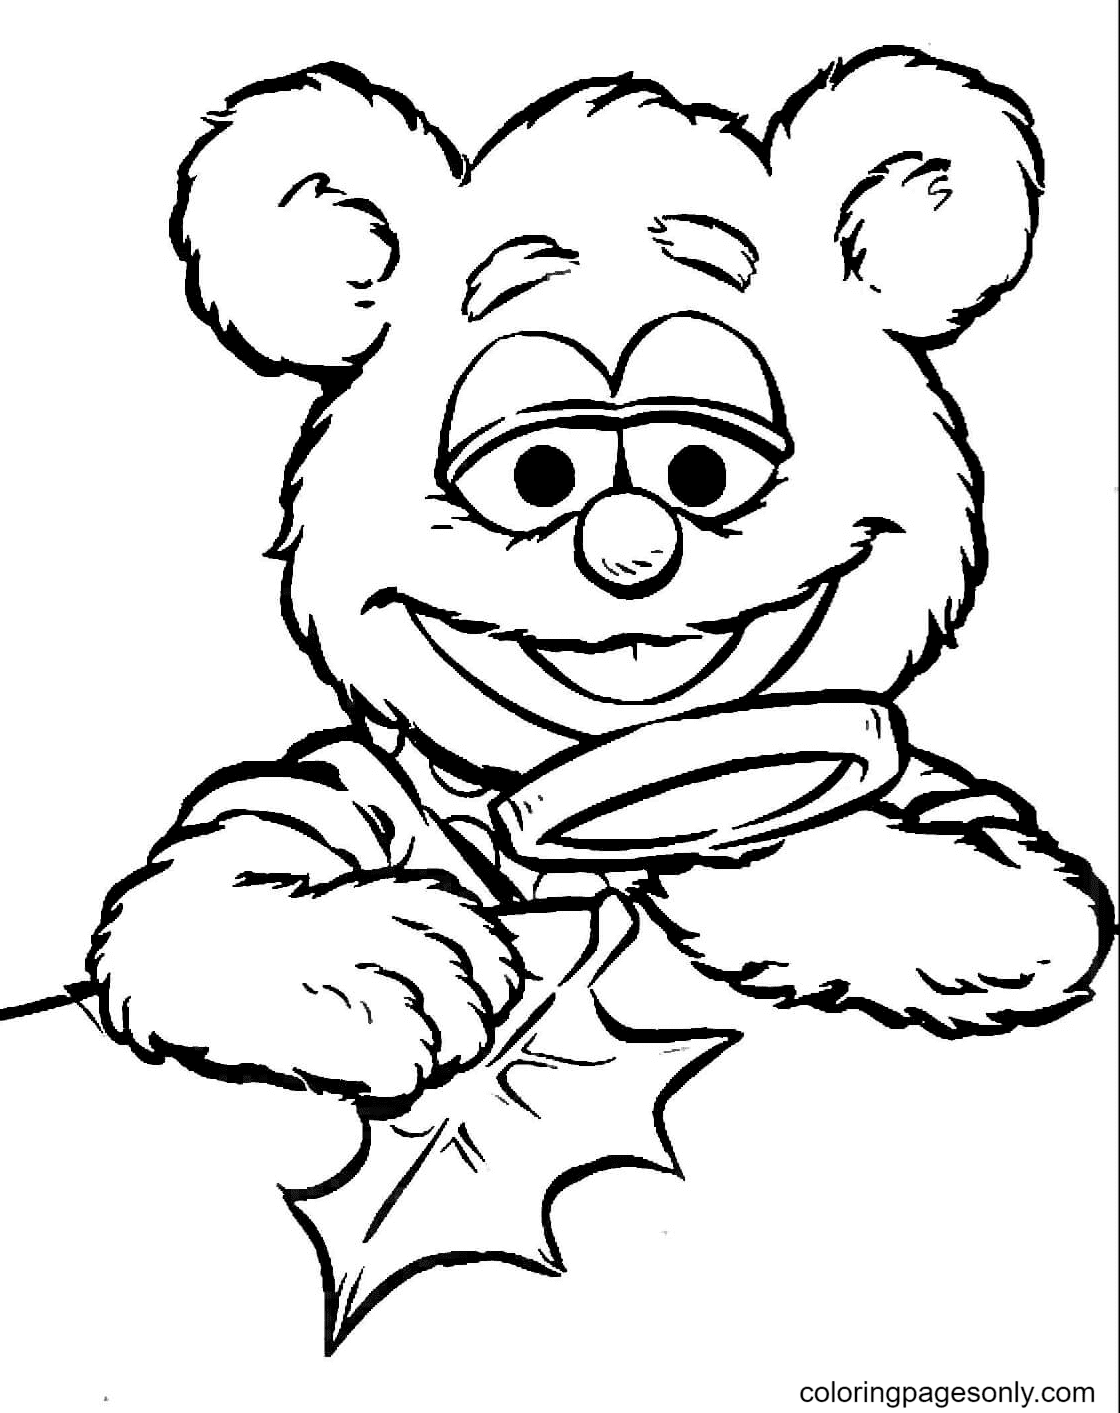 Fozzie with magnifying glass Coloring Page